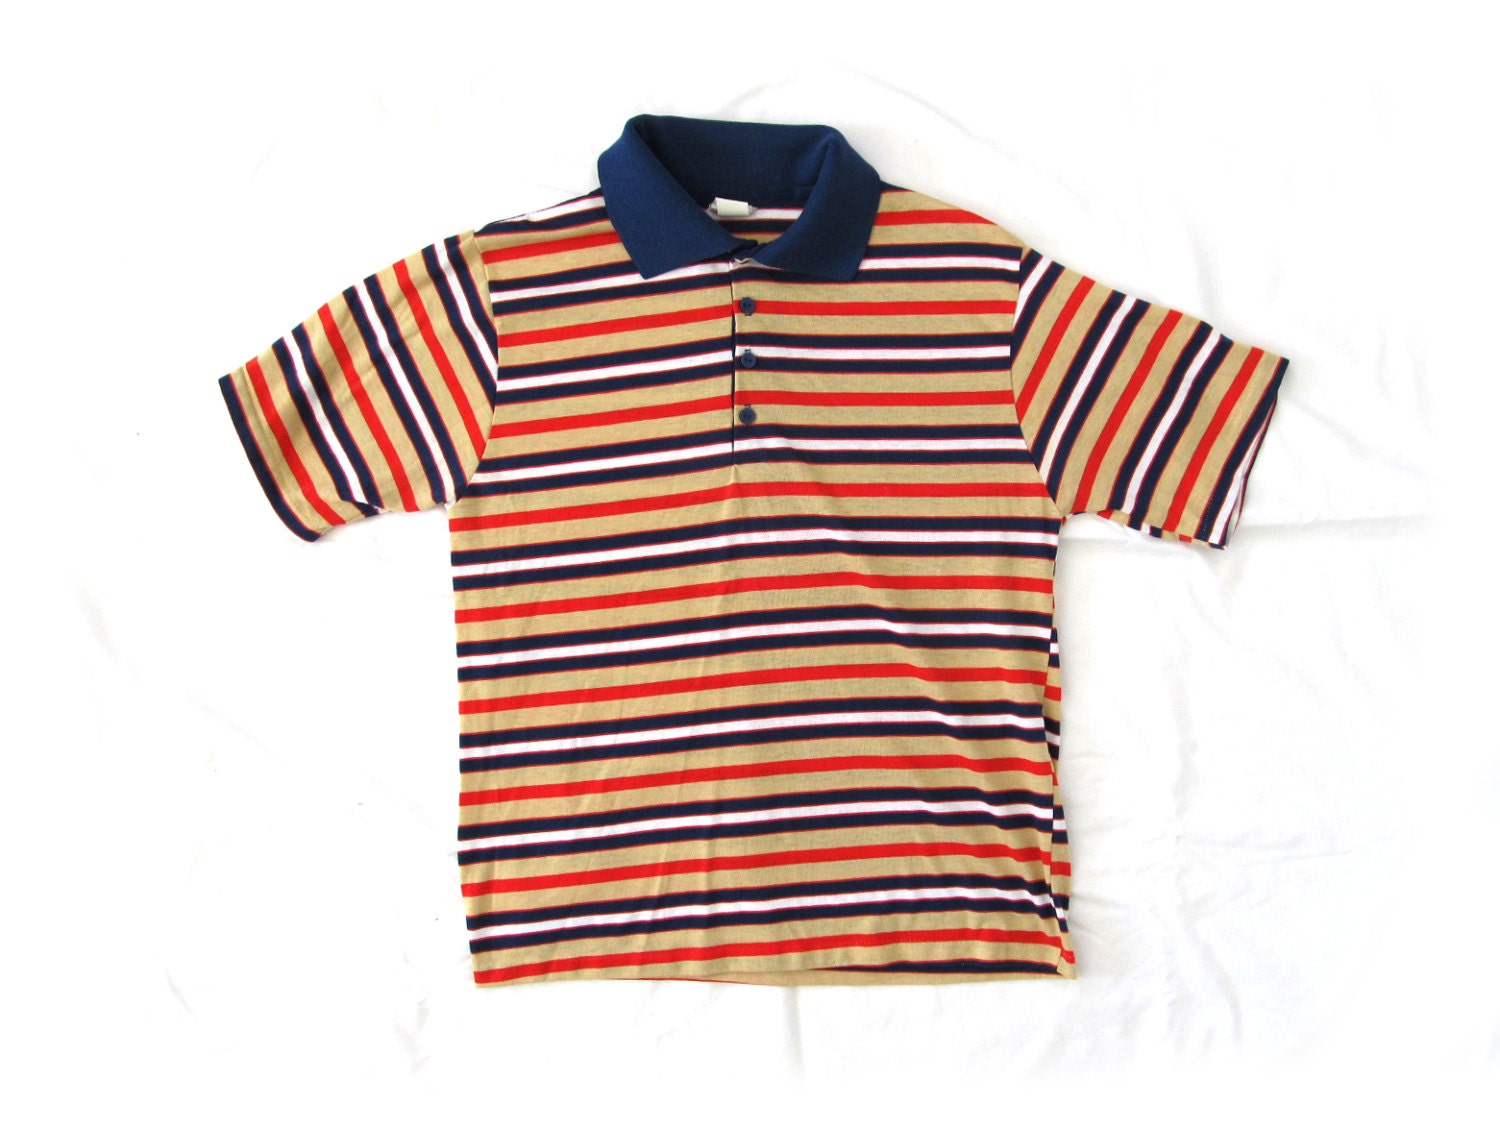 mens shirt vintage clothing striped 1980s by diaphanousvintage